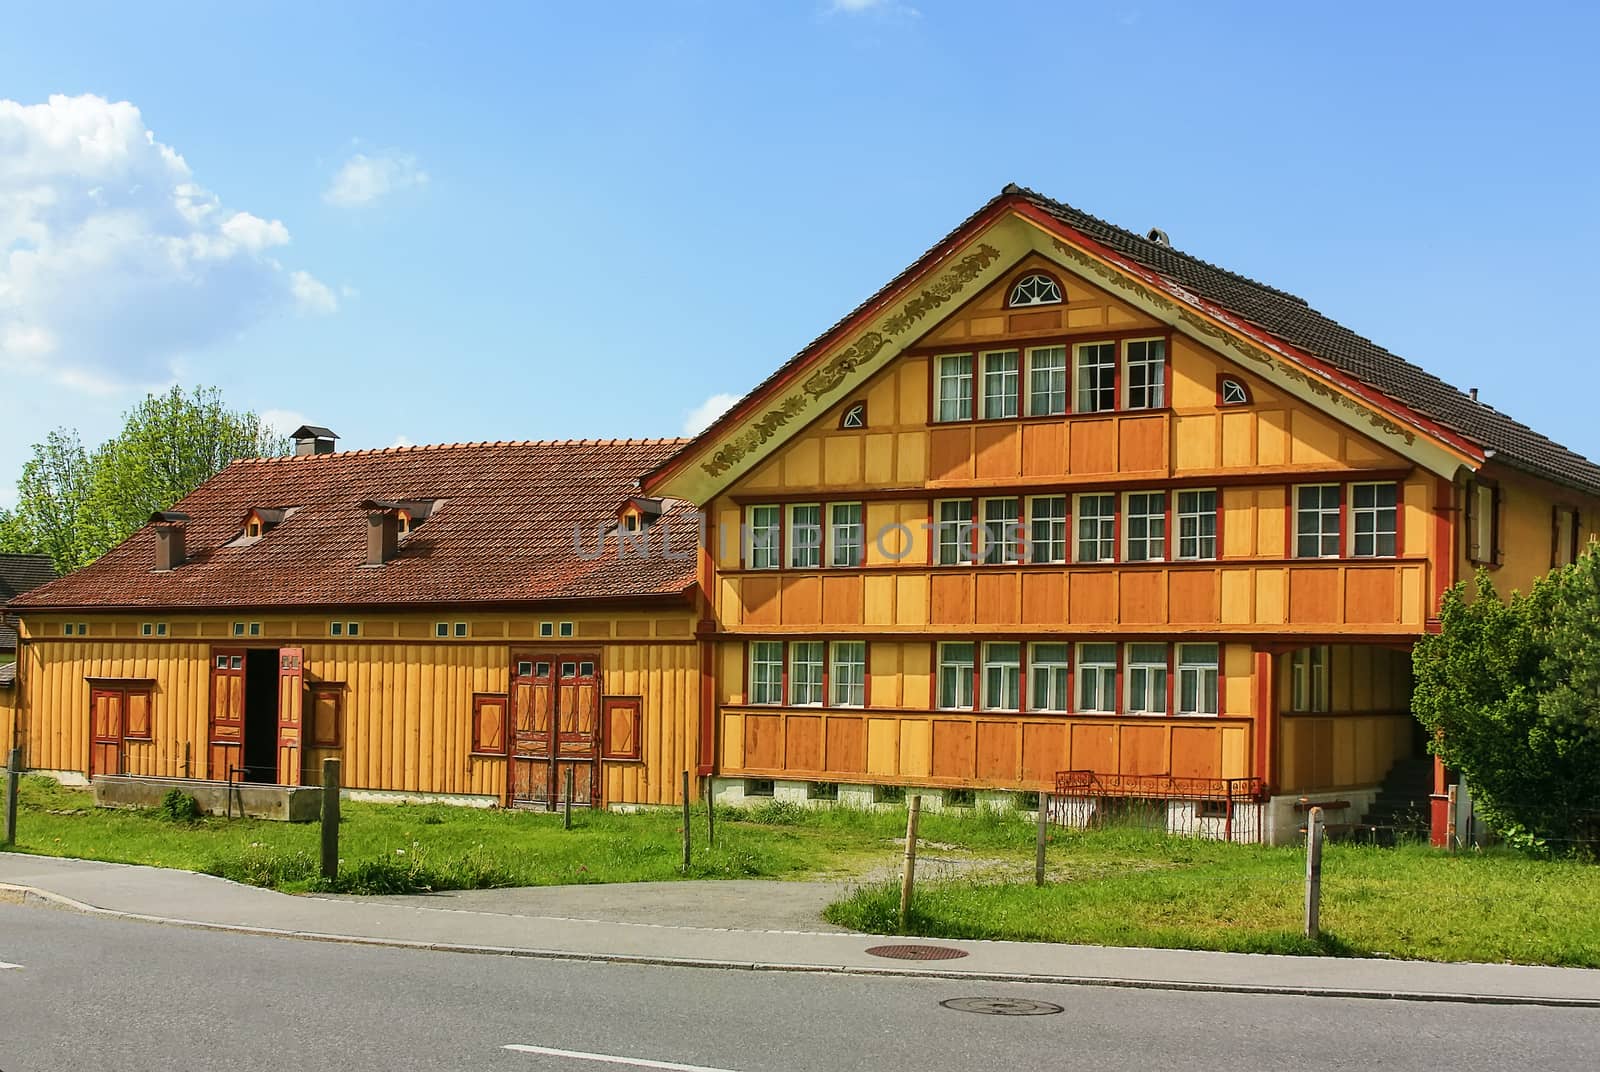 Wooden house in the local style in Appenzel city,Switzerland